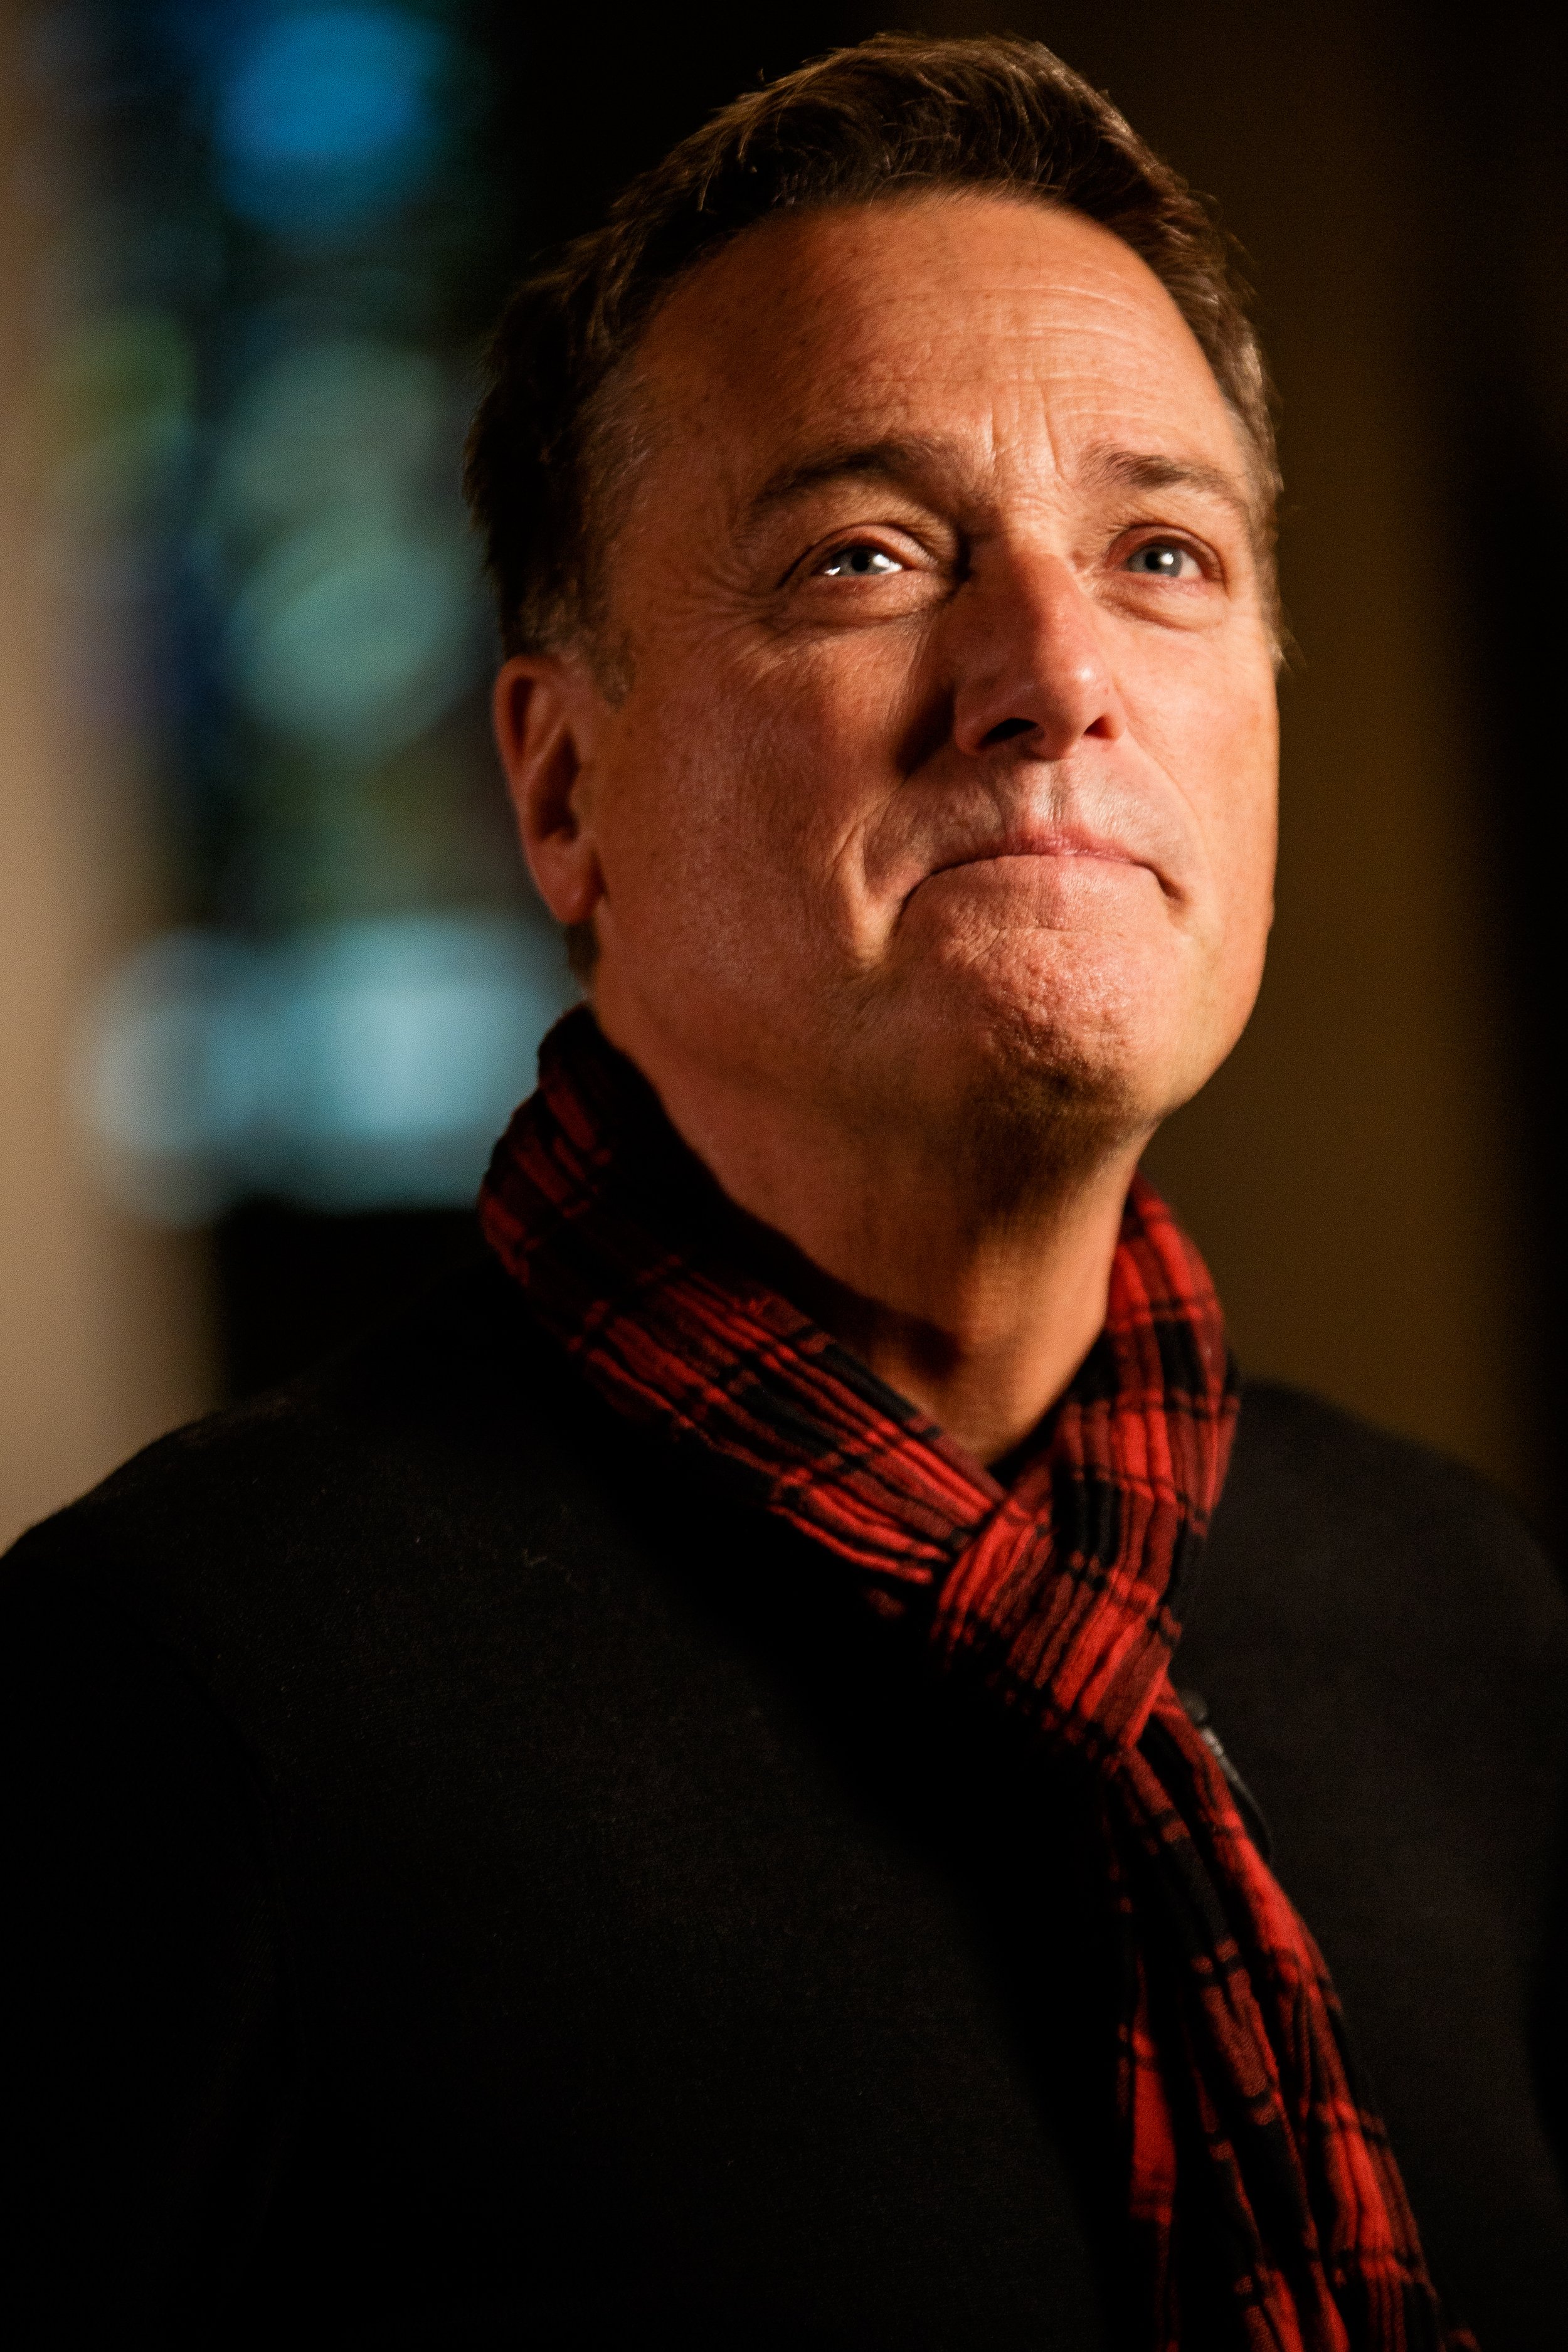  Musician Michael W. Smith during an interview on his selection to perform for the funeral of President George H.W. Bush in the National Cathedral.    December 2018   